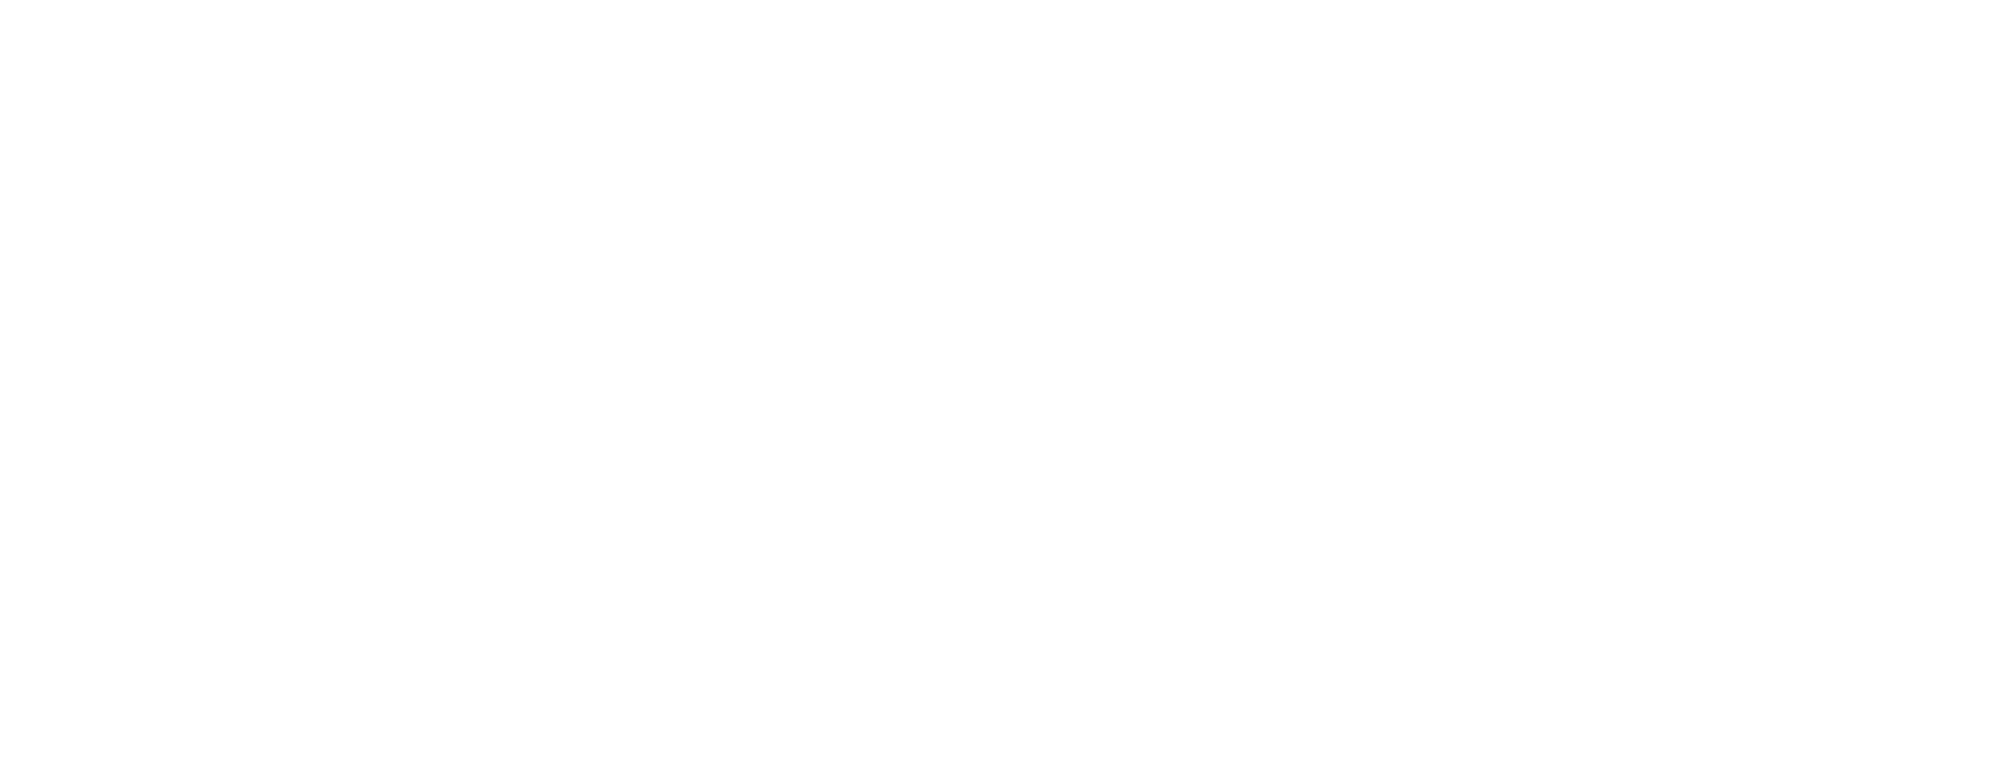 Coral Cliffs Tours + Townhomes